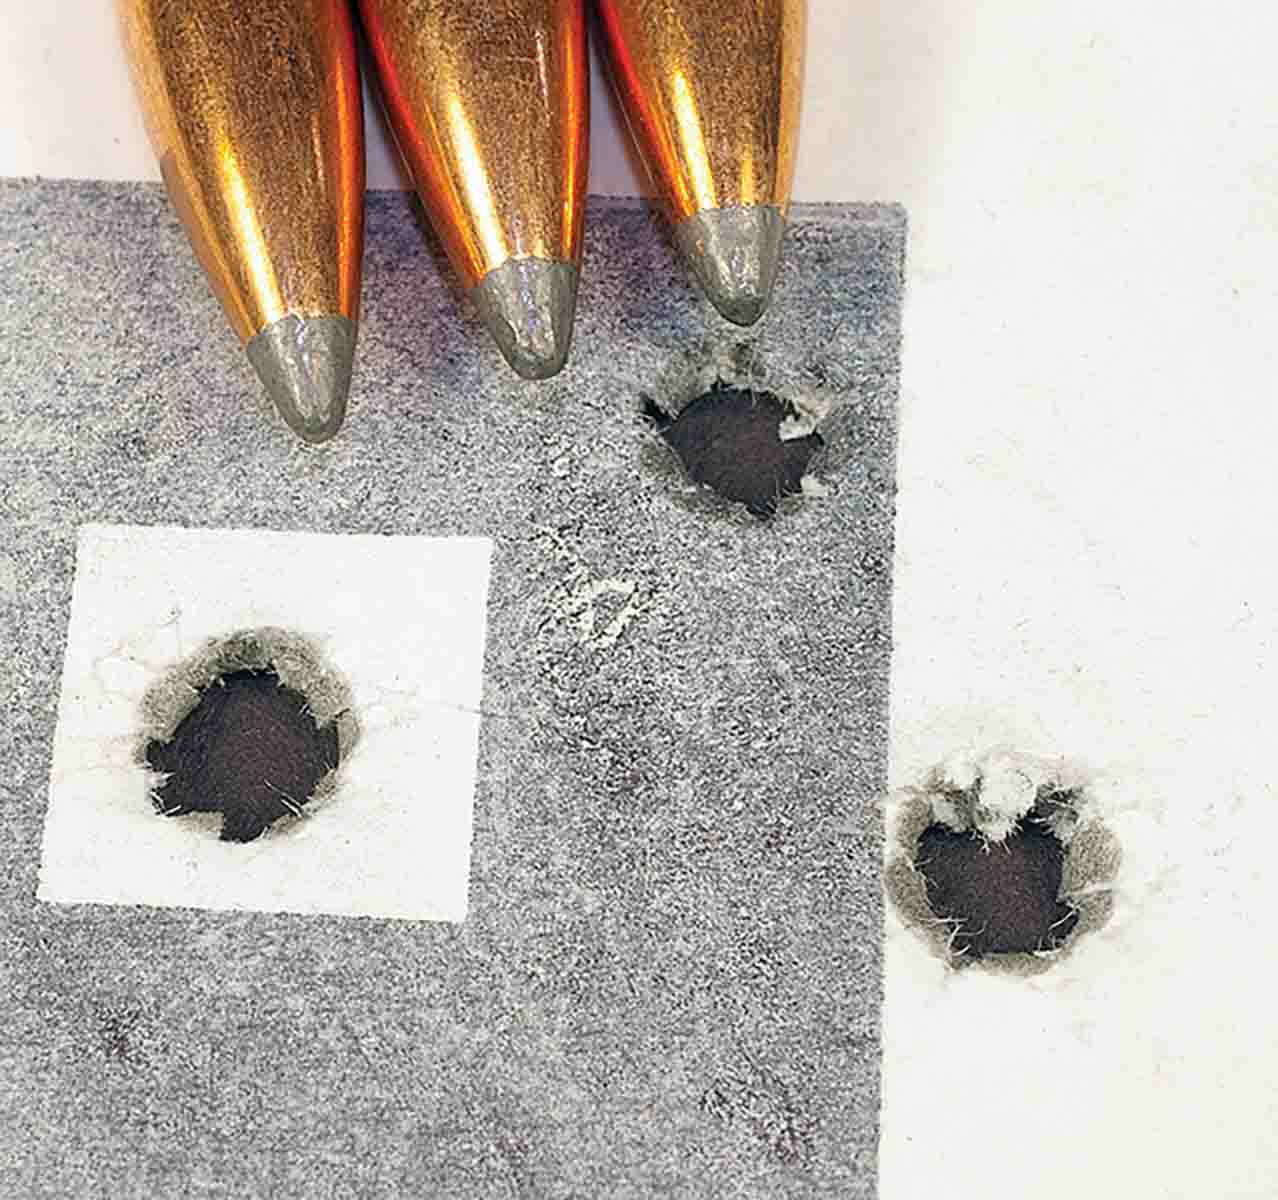 This three-shot, 100-yard group from the SPL test rifle was shot with Sierra 150-grain Pro-Hunter bullets handloaded with VV-N140 powder.